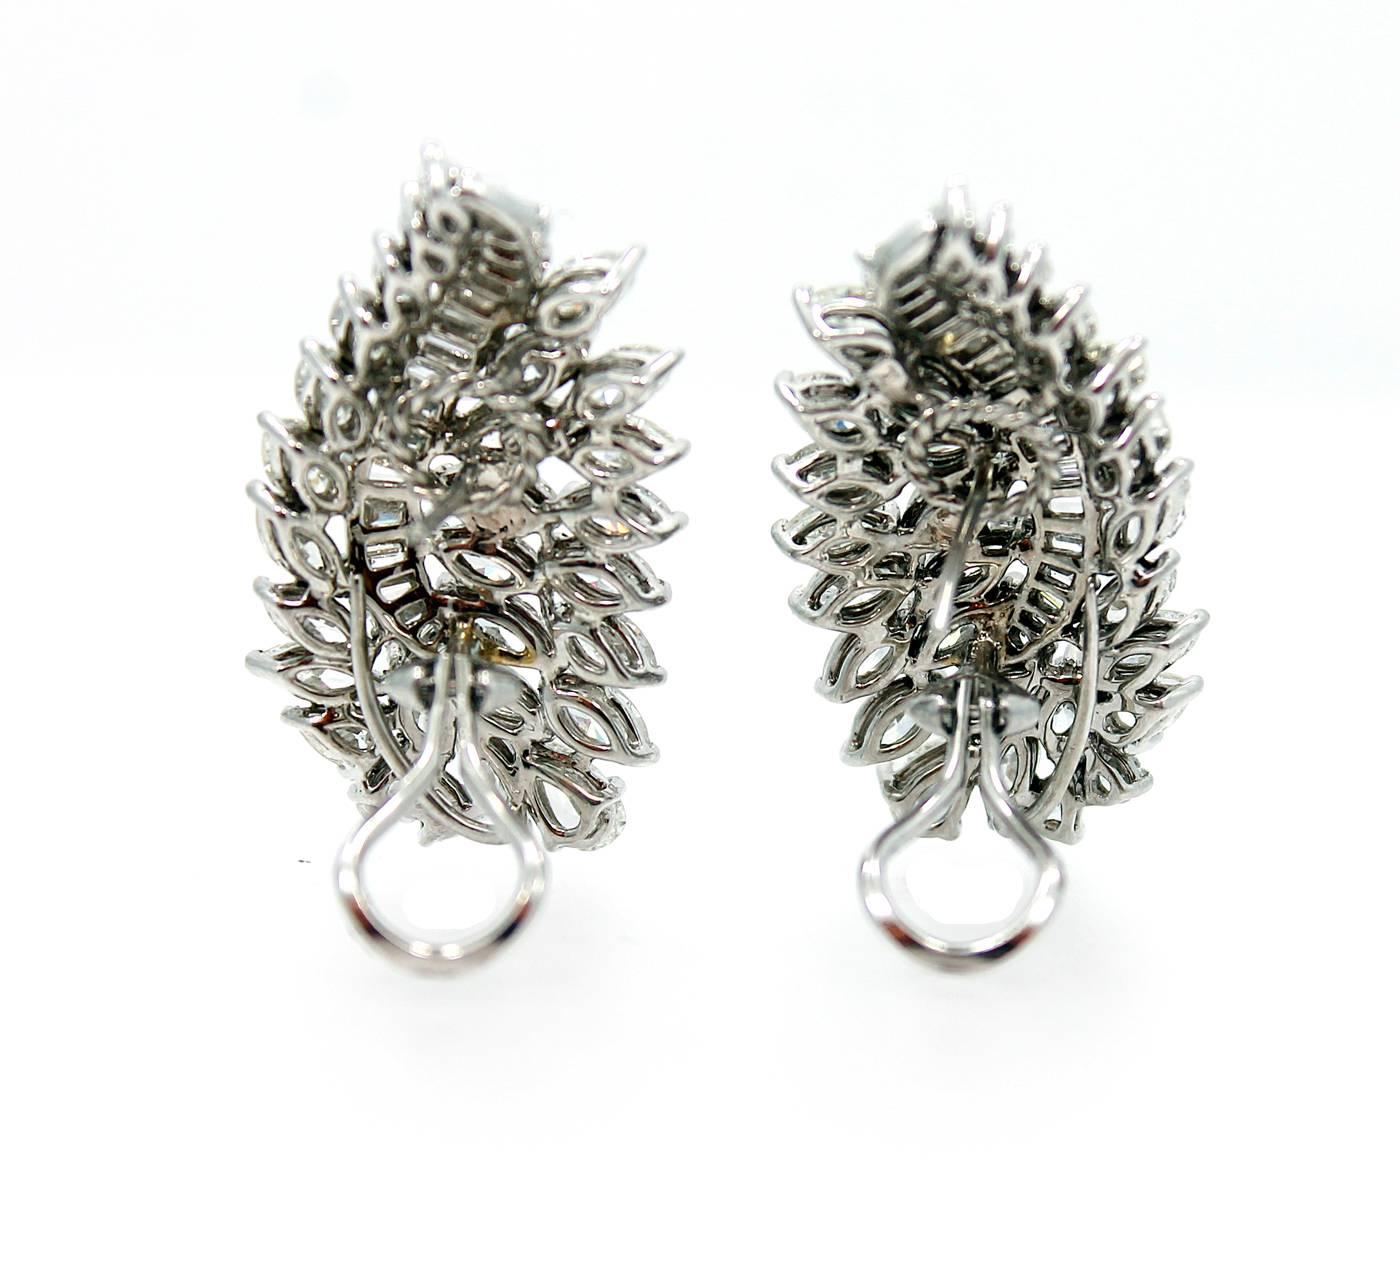 Platinum Earrings with 90 Diamonds with a total of 11.75 carats, H-J Color and VS1-SI1 in clarity. Excellent condition.